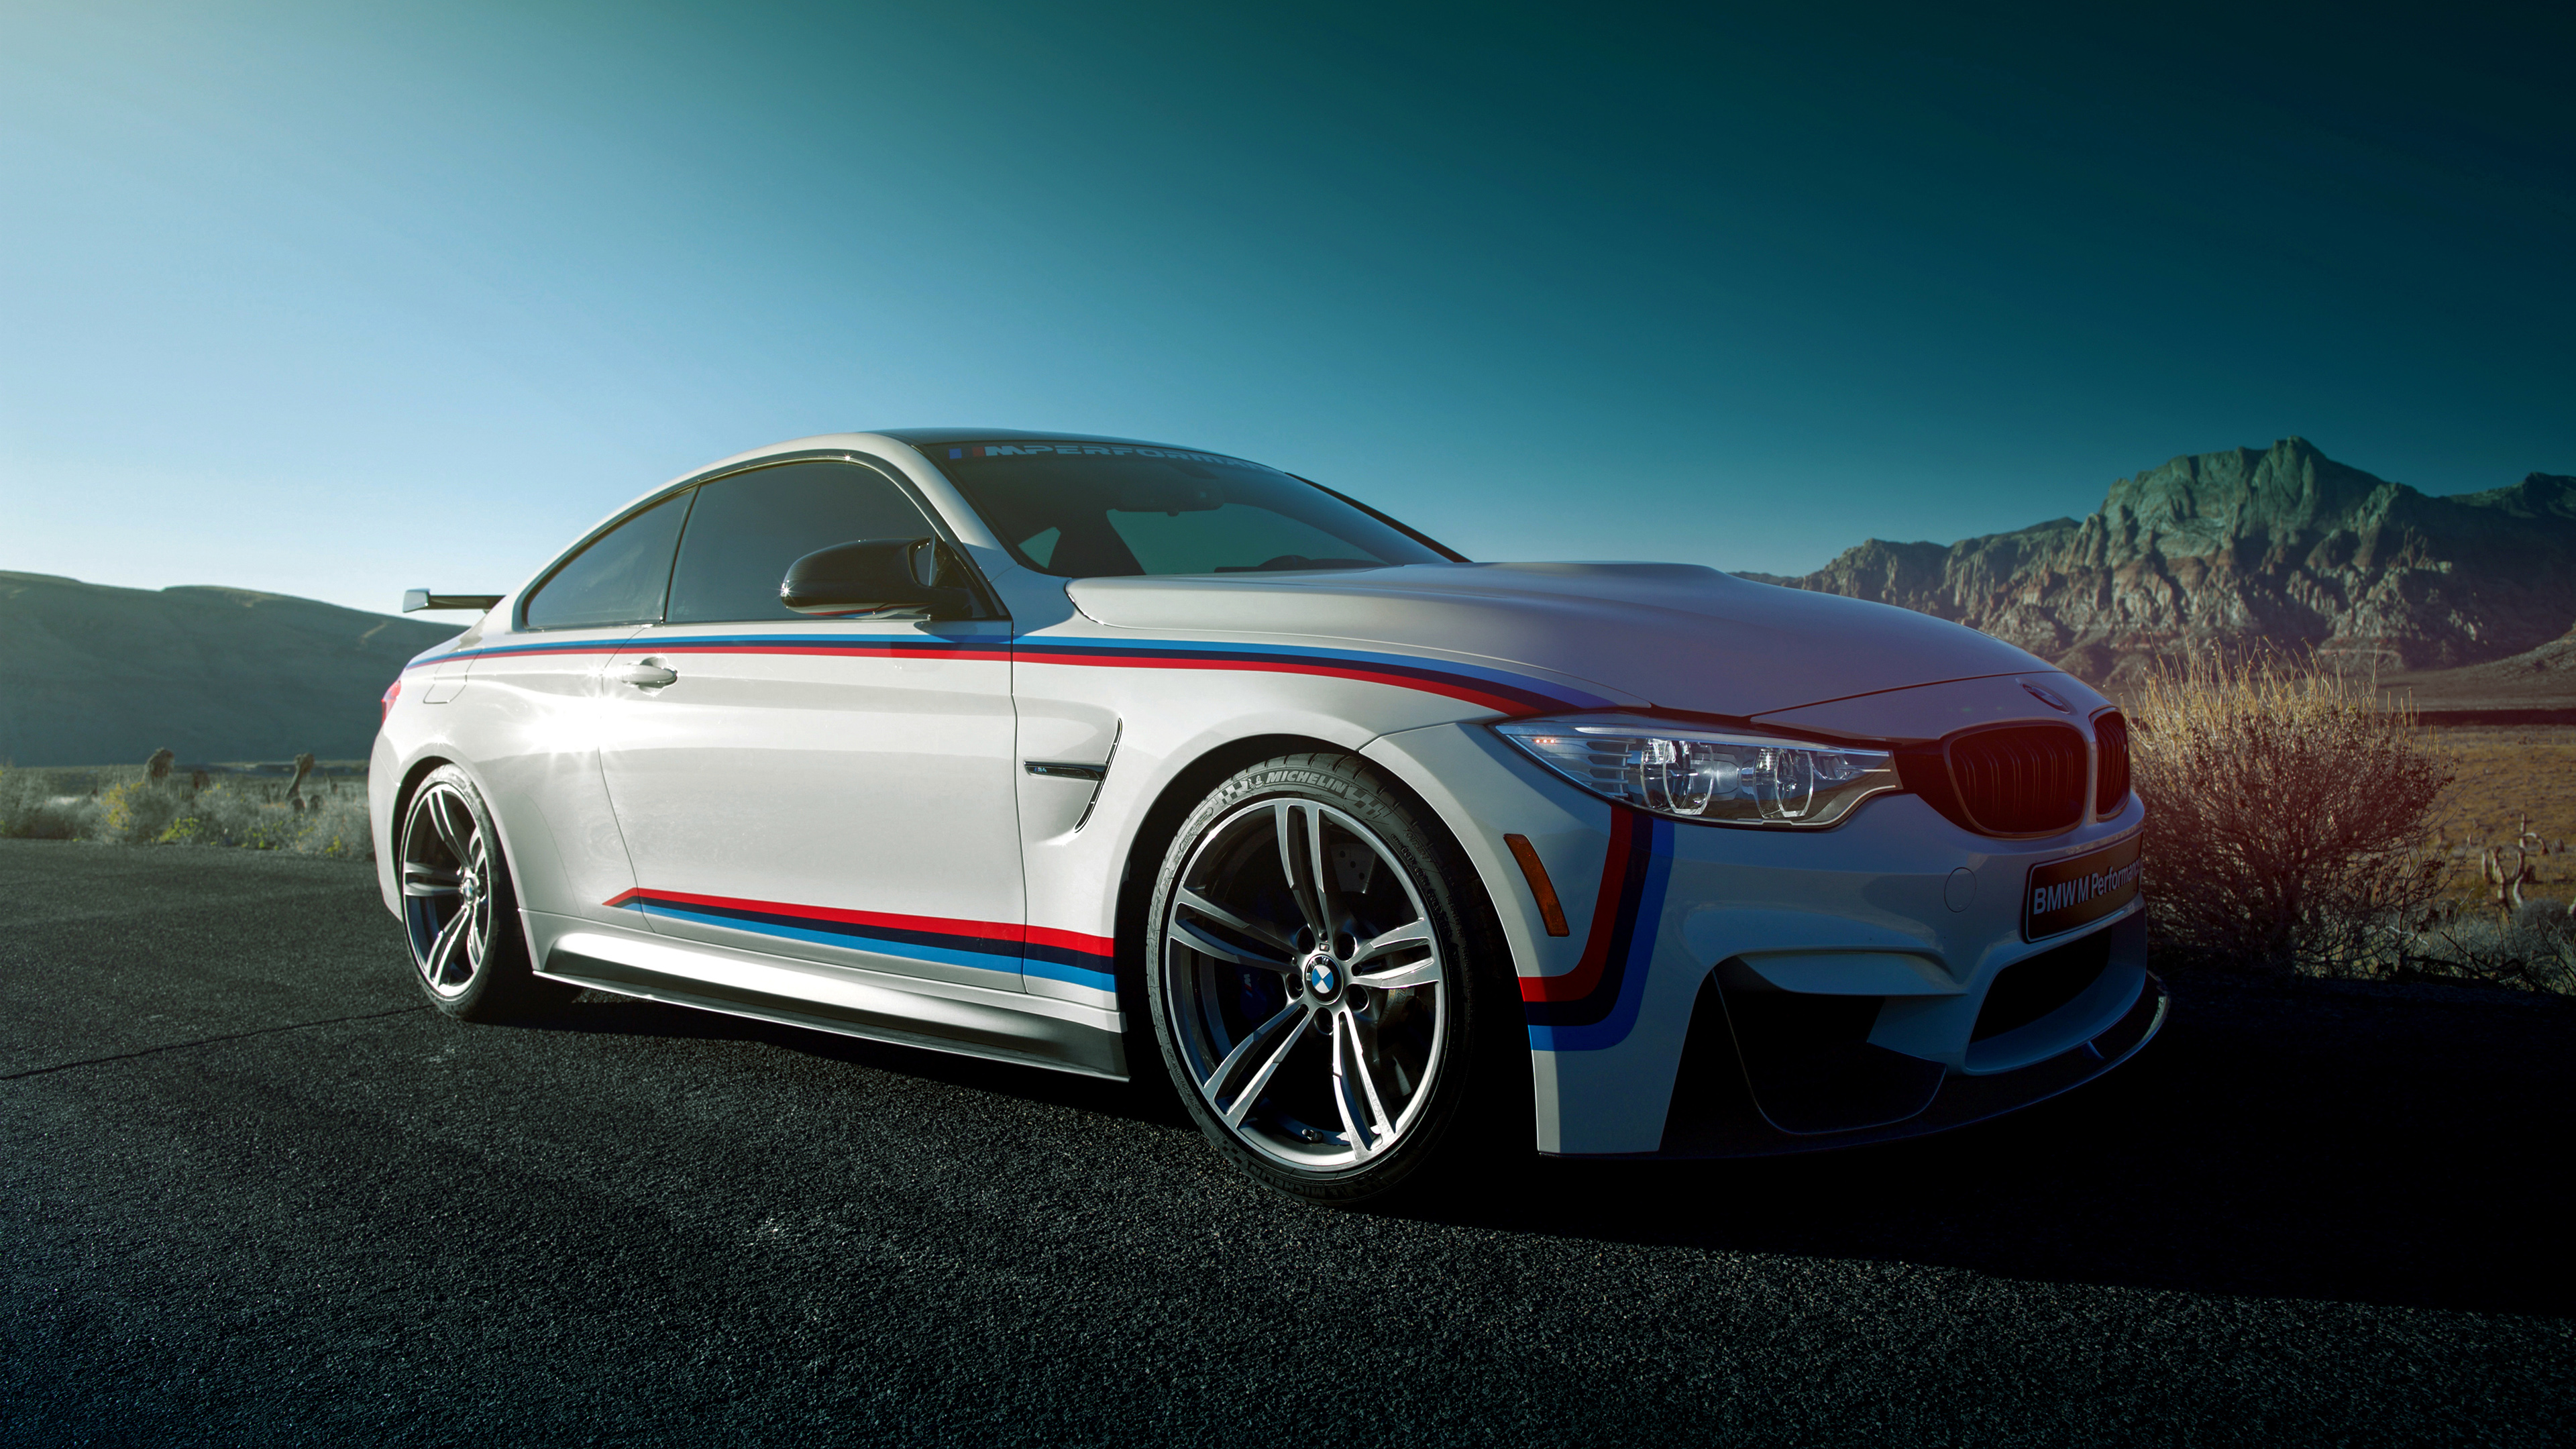 Bmw M4 Coupe M Performancerelated Car Wallpapers Wallpaper Cars Wallpaper Better